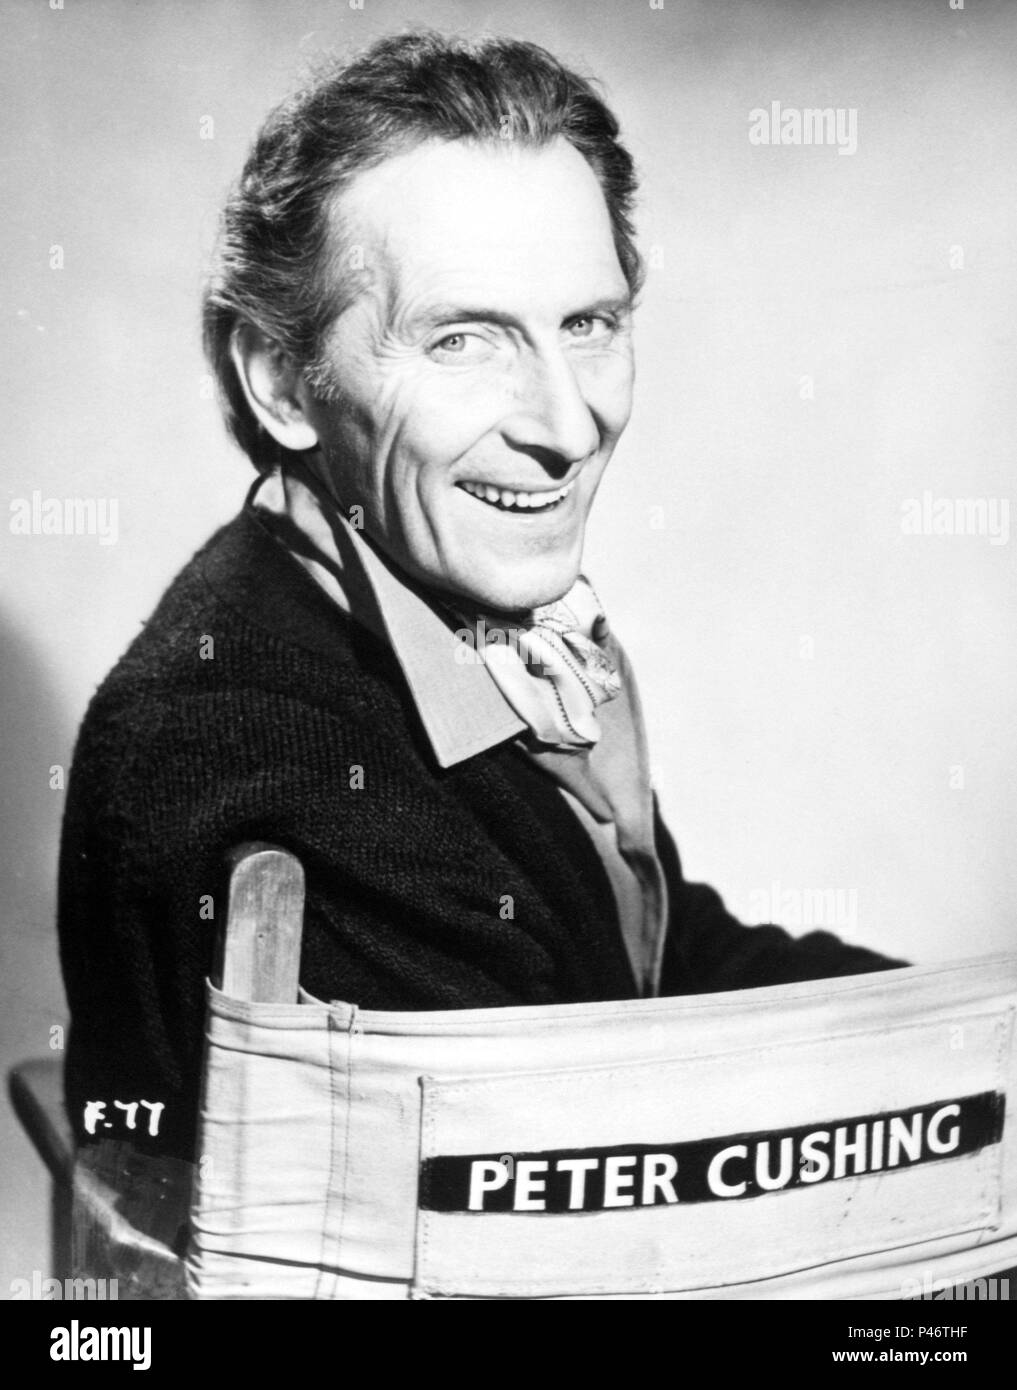 Peter cushing Black and White Stock Photos & Images - Alamy